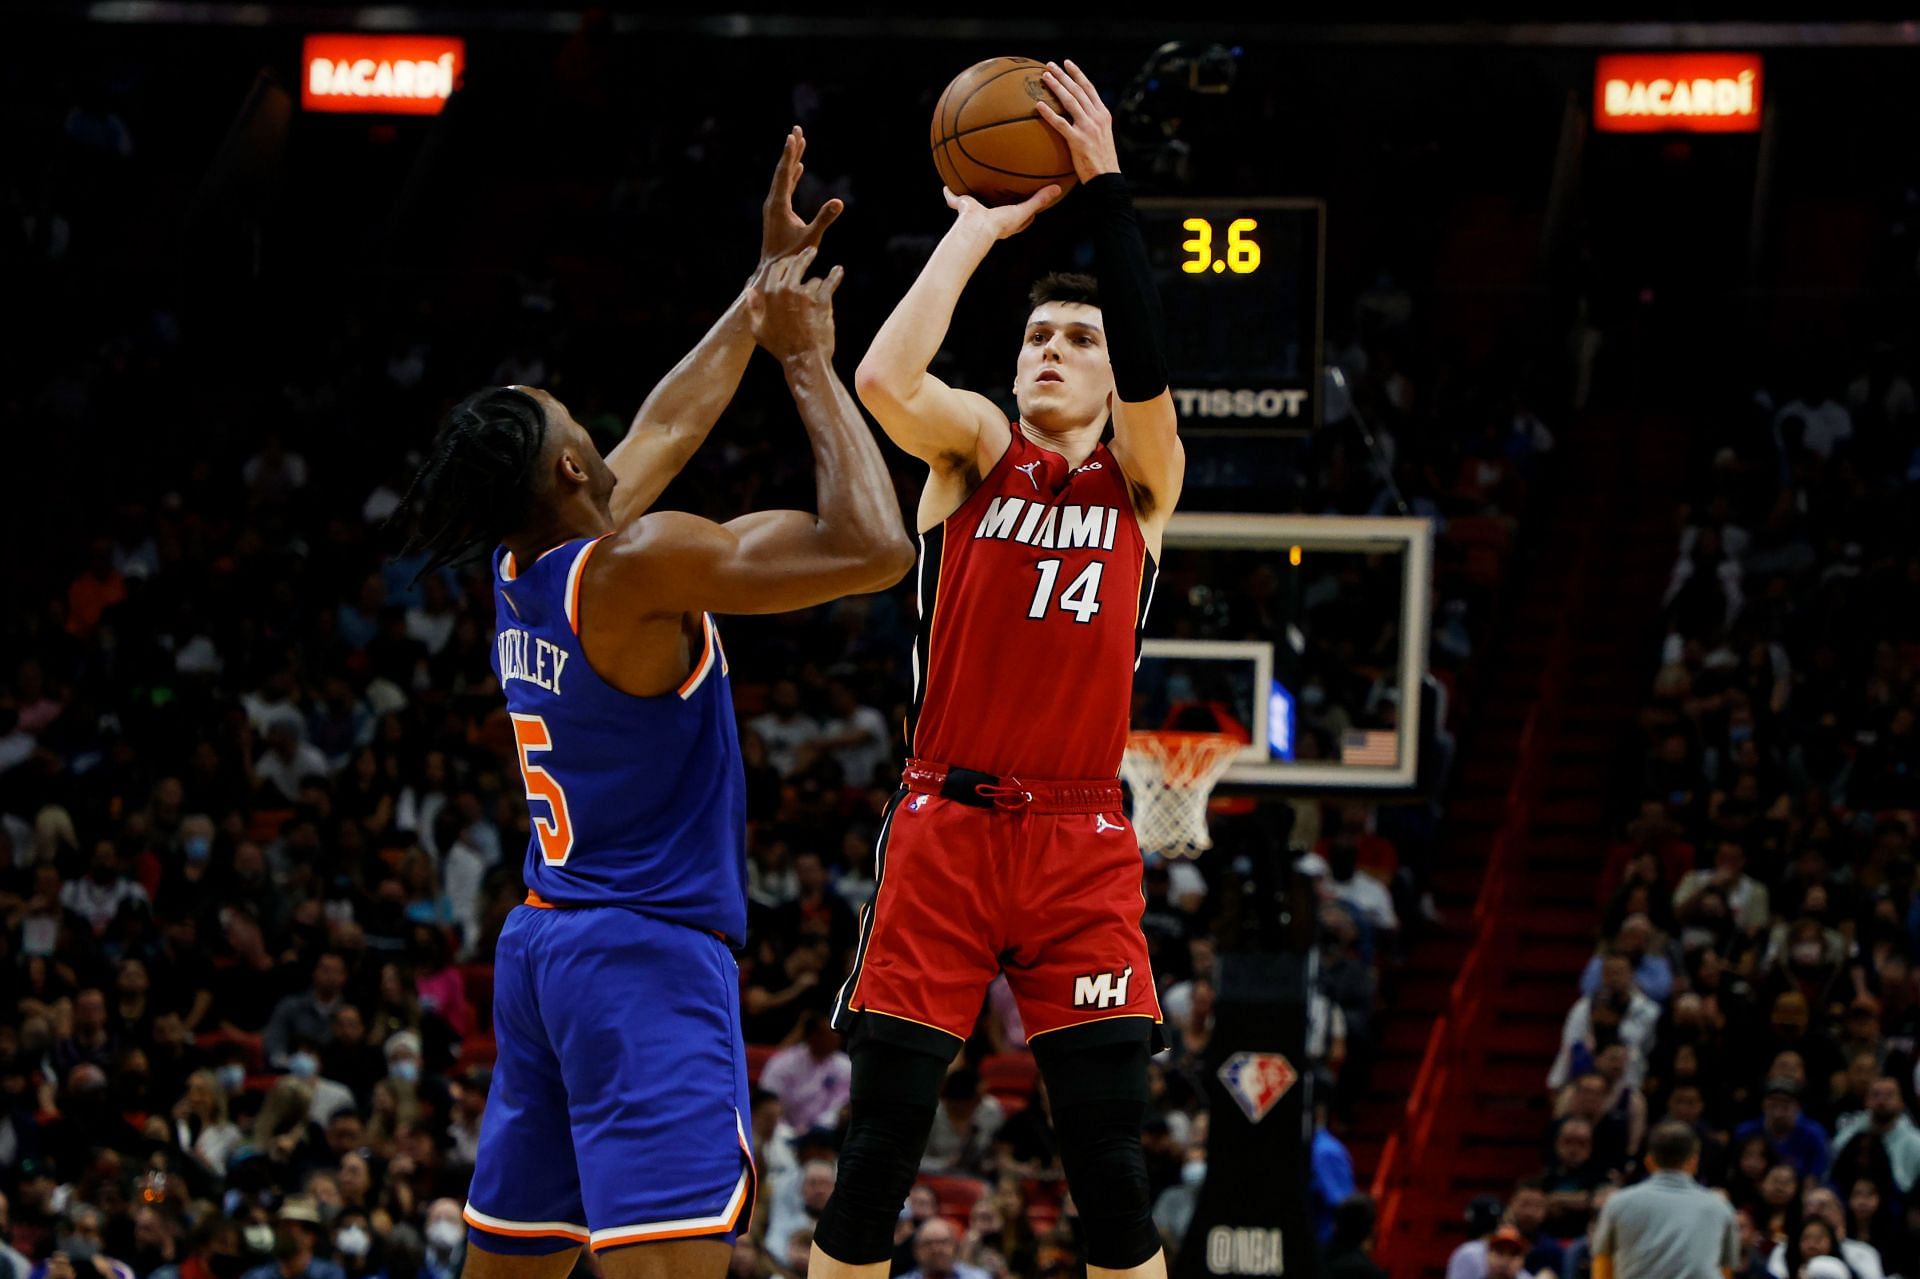 Miami Heat shooting guard Tyler Herro is a favorite for Sixth Man of the Year.